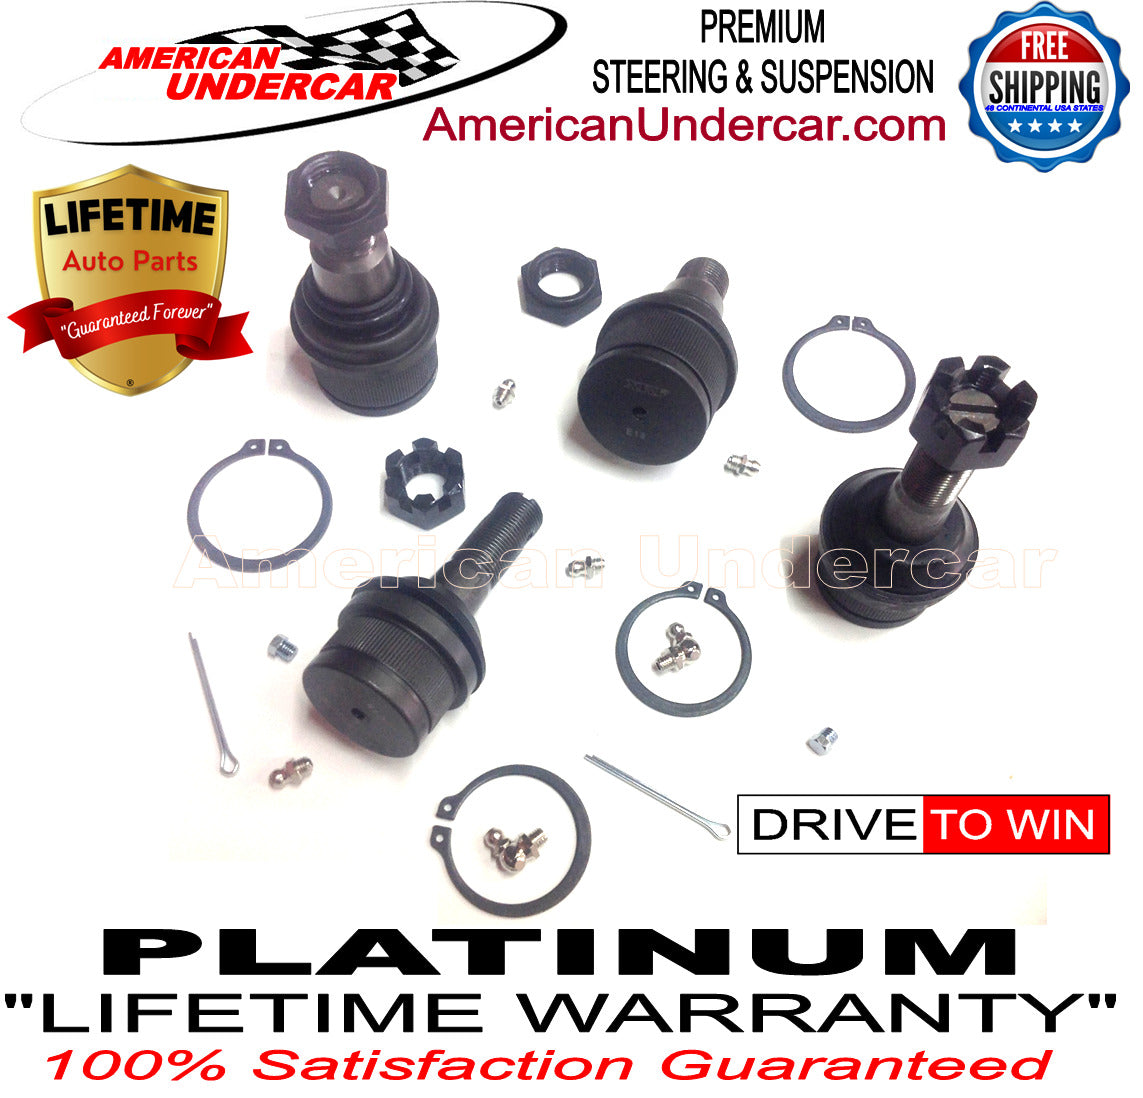 Lifetime Ball Joint Upper & Lower Suspension Kit for 1994-2004 Ford F450, F550 Super Duty, Mono Beam axle